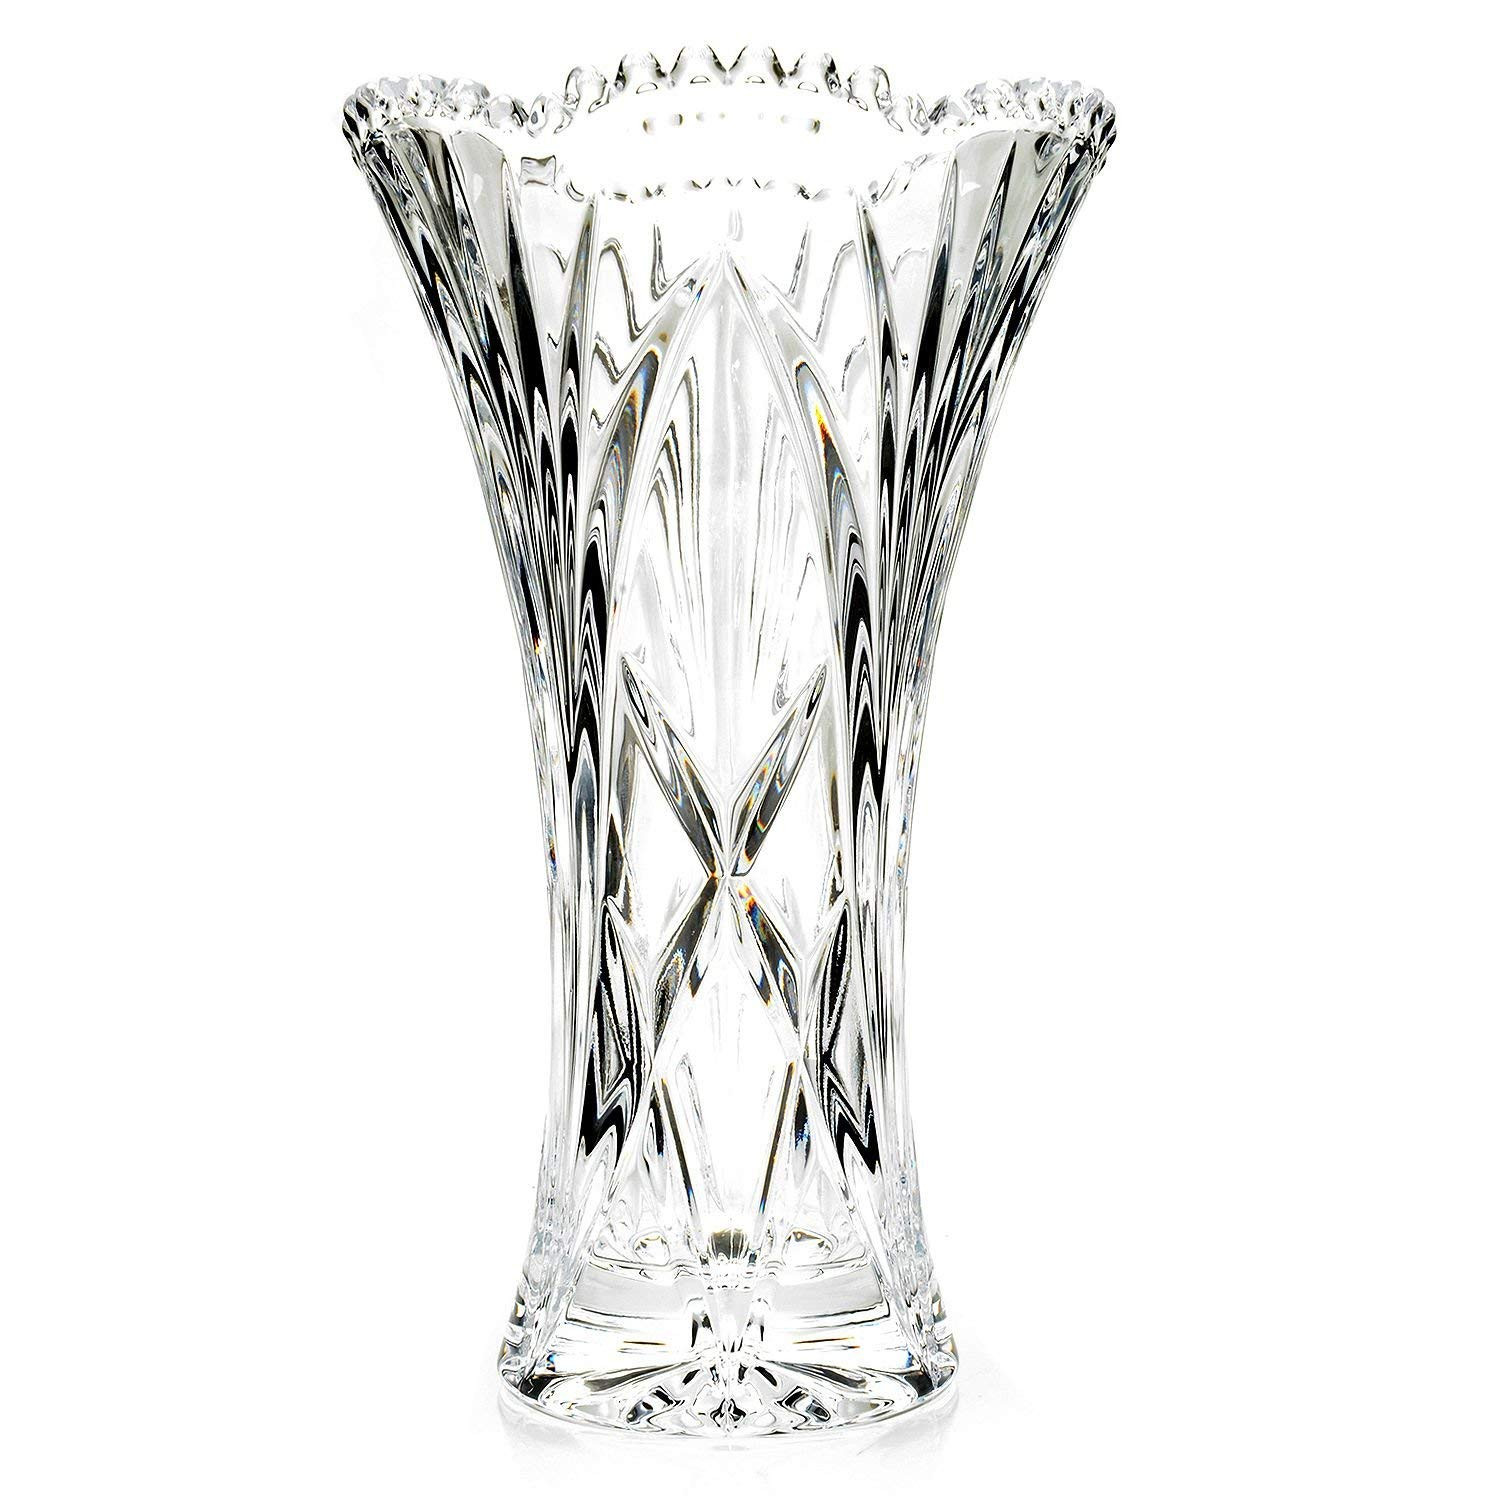 24 Perfect Waterford Lismore 8 Flared Vase 2024 free download waterford lismore 8 flared vase of amazon com marquis by waterford newberry vase 10 home kitchen within 71ubm01urhl sl1500